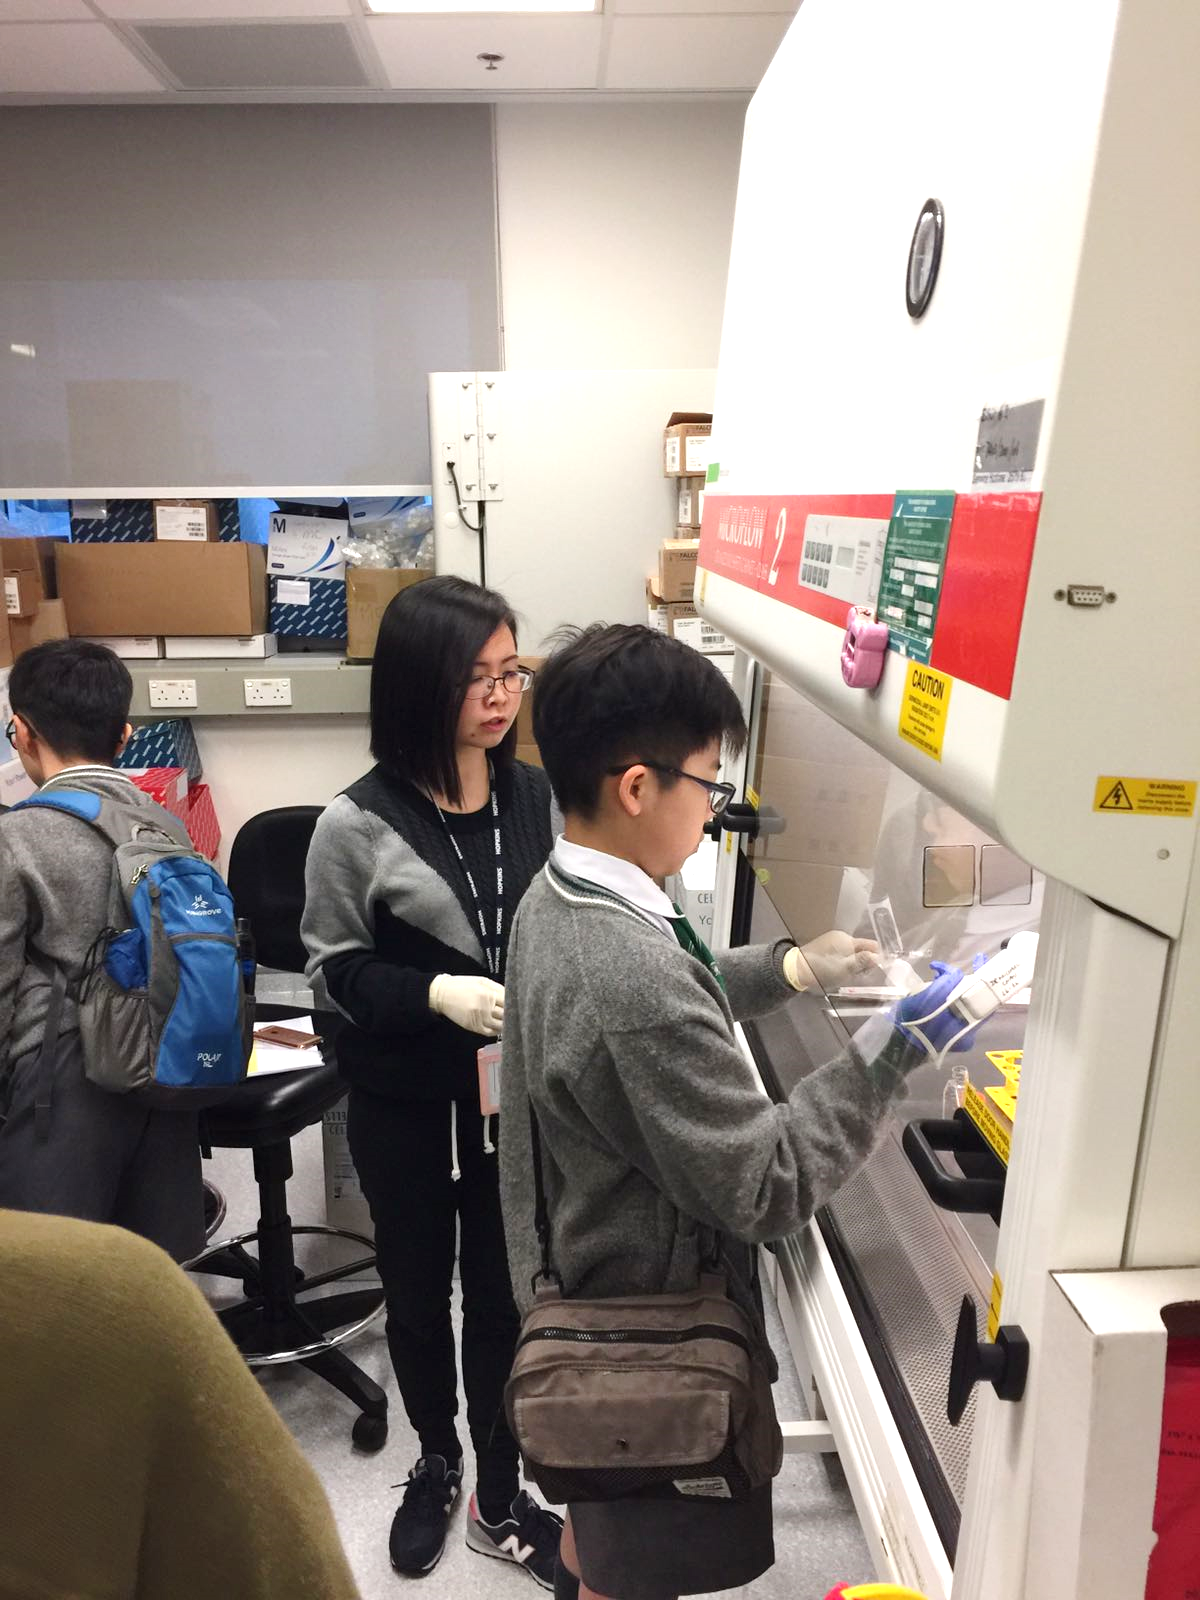 Dr Christine Leung, Education Ambassador, guided students from St. Joseph 's Primary School to conduct an experiment in the Biosafety Cabinet.